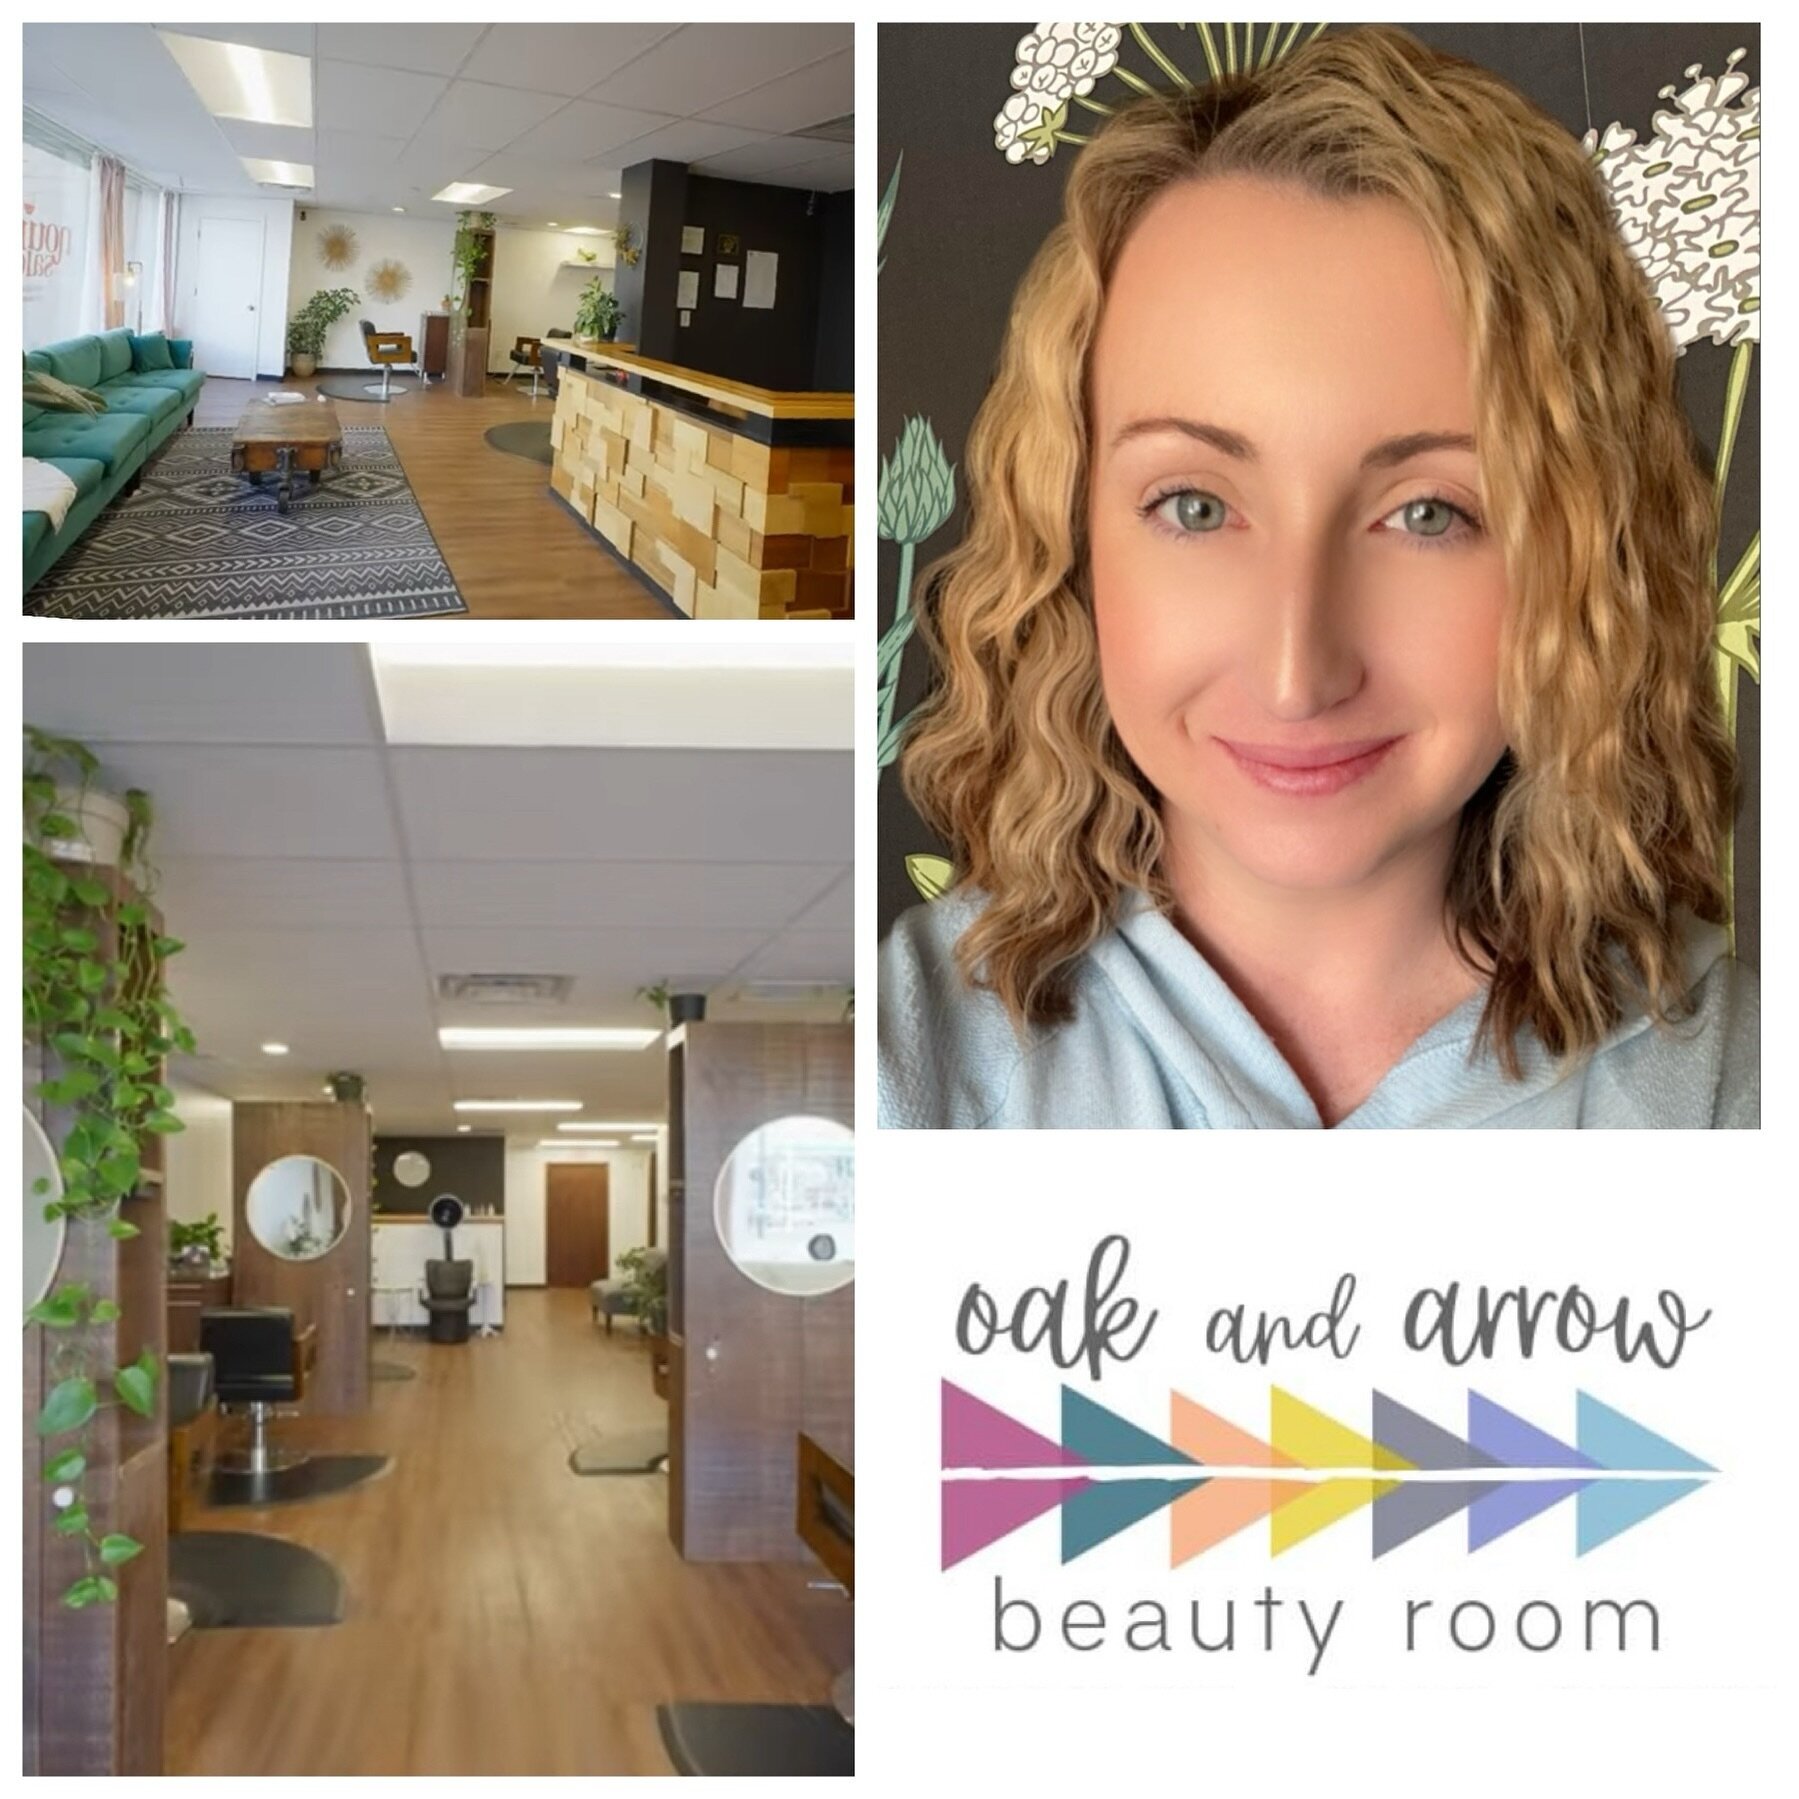 🌱Remember our growth? 👇🏻
✨Meet our newest talent!✨
Oak and Arrow Beauty Room - Vandalia presents:
Kaila Bryant | Experienced Hair Stylist for 14 Years | Proud Mother of 3 Amazing Kids | Specializing in Haircuts, Colors, Foil Highlights, Styles, Pe